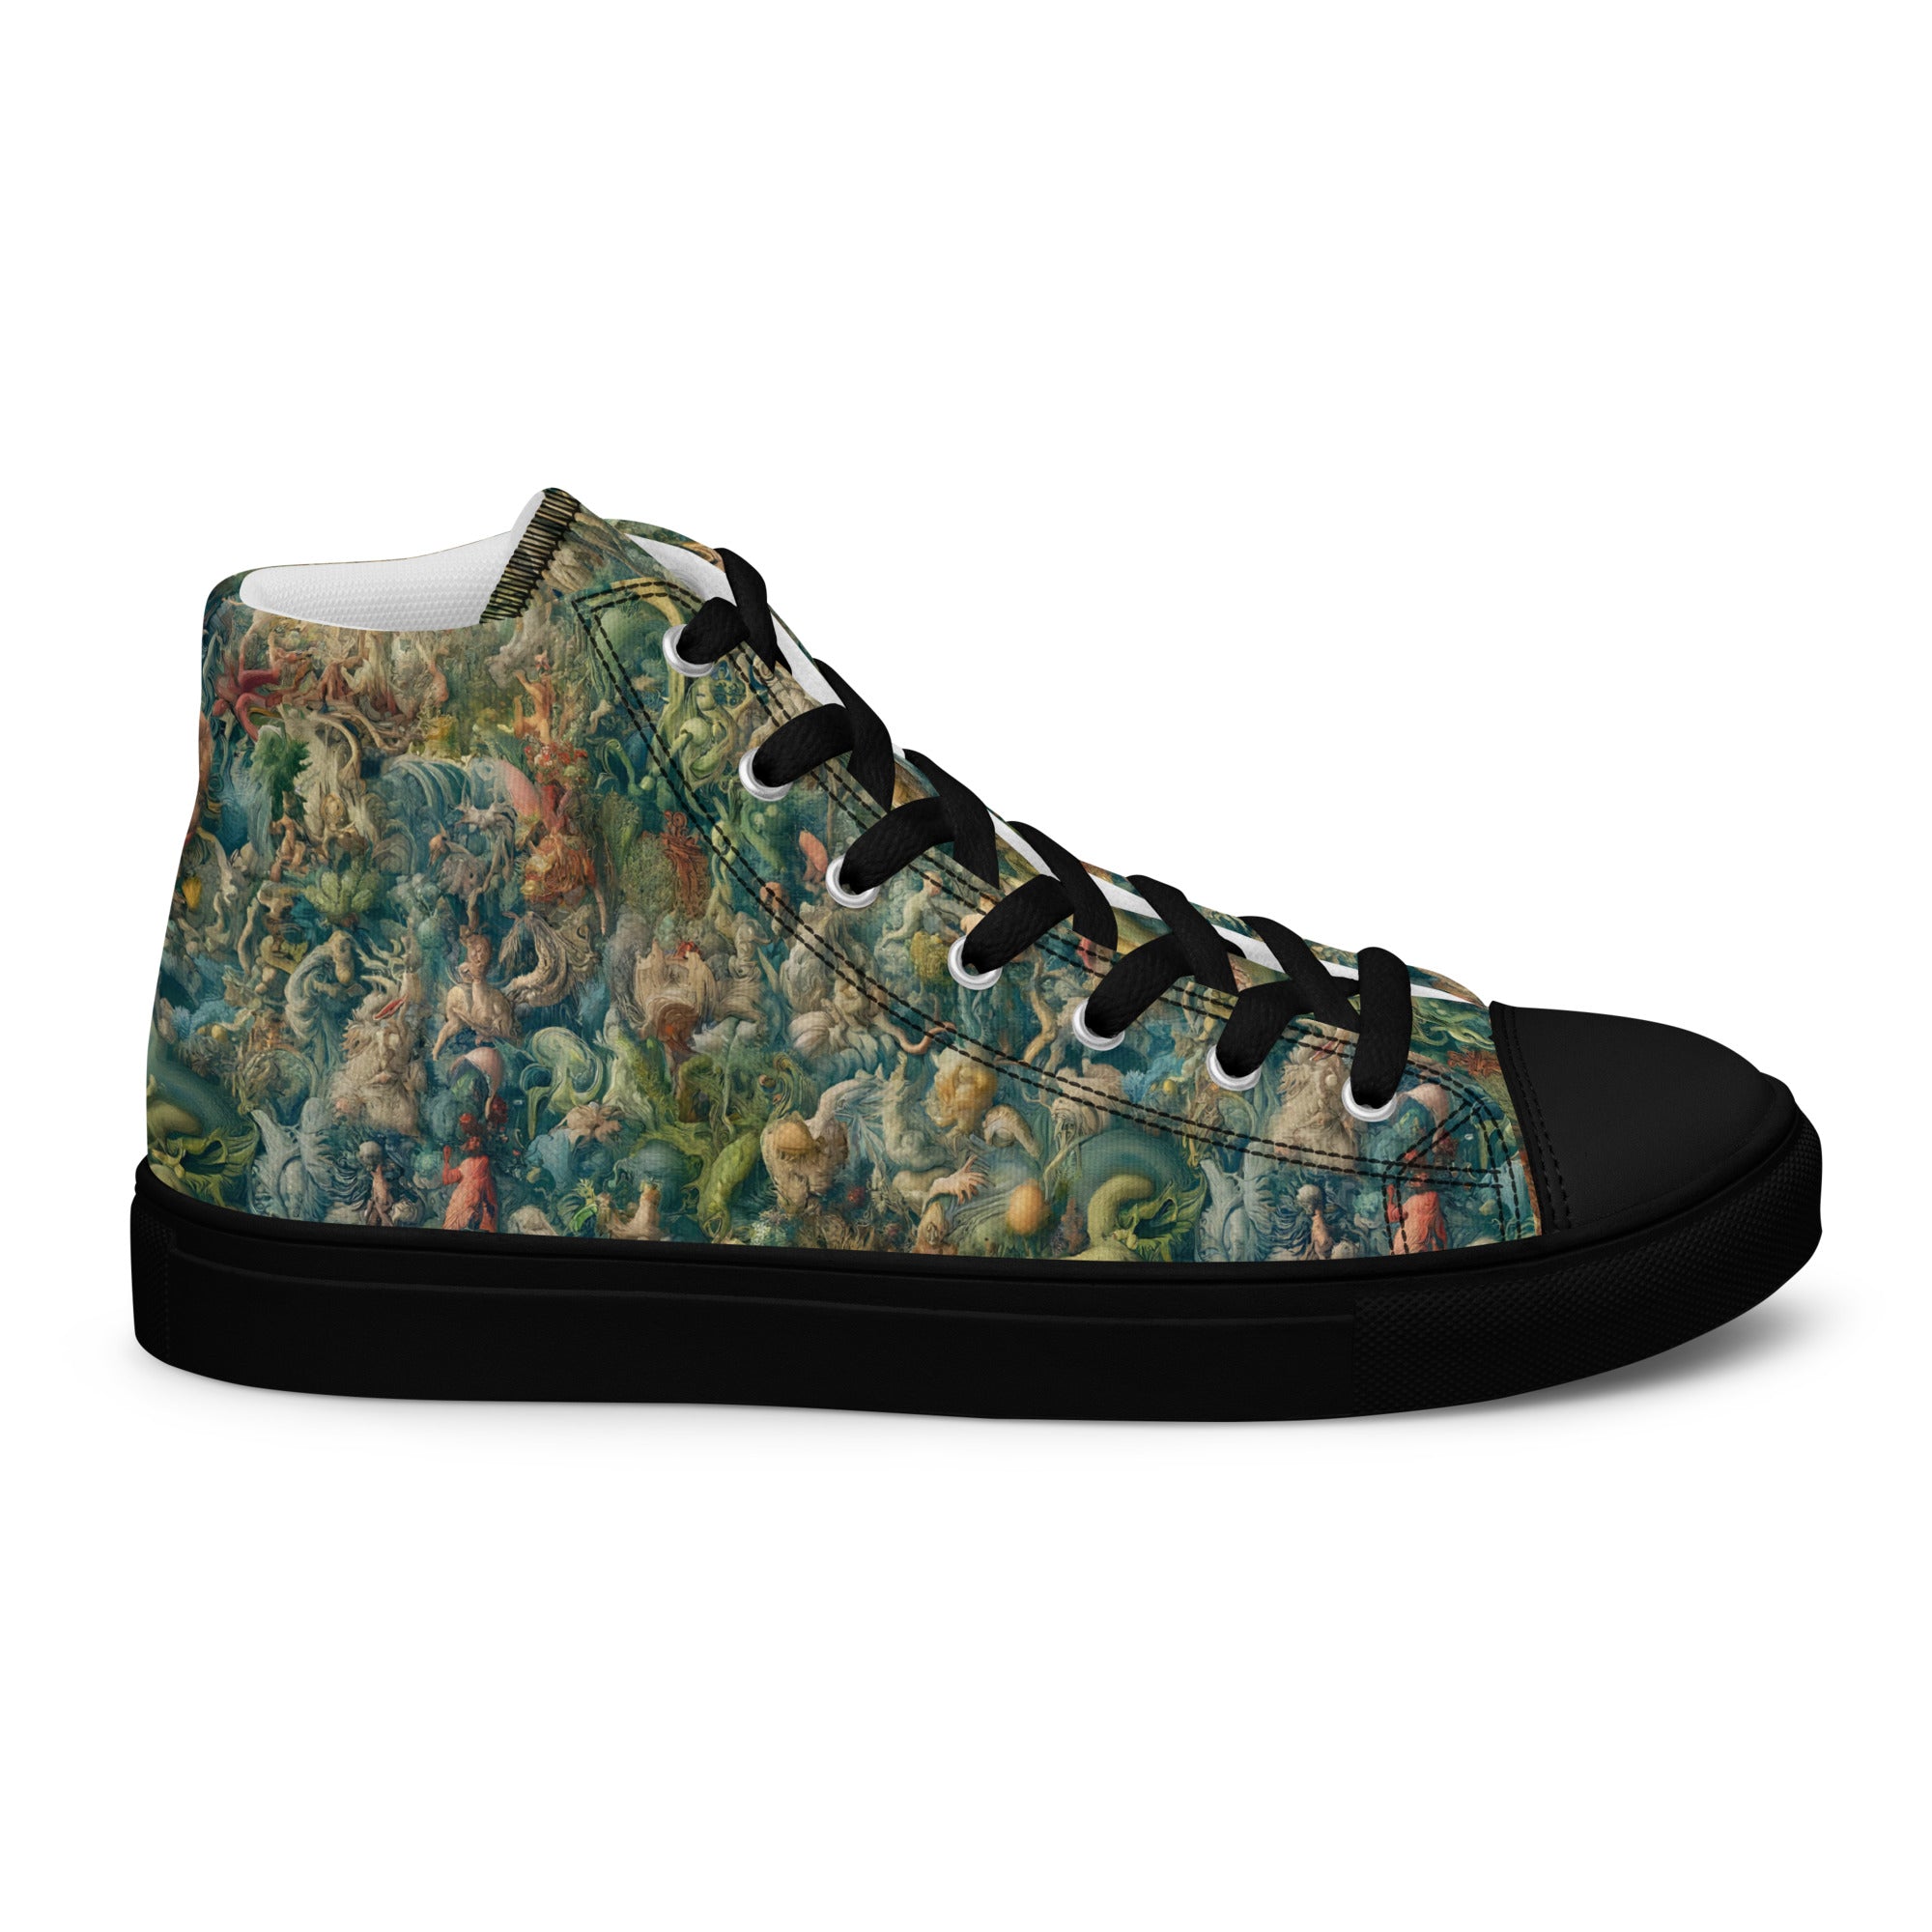 Hieronymus Bosch 'The Garden of Earthly Delights' High Top Shoes | Premium Art High Top Sneakers for Men